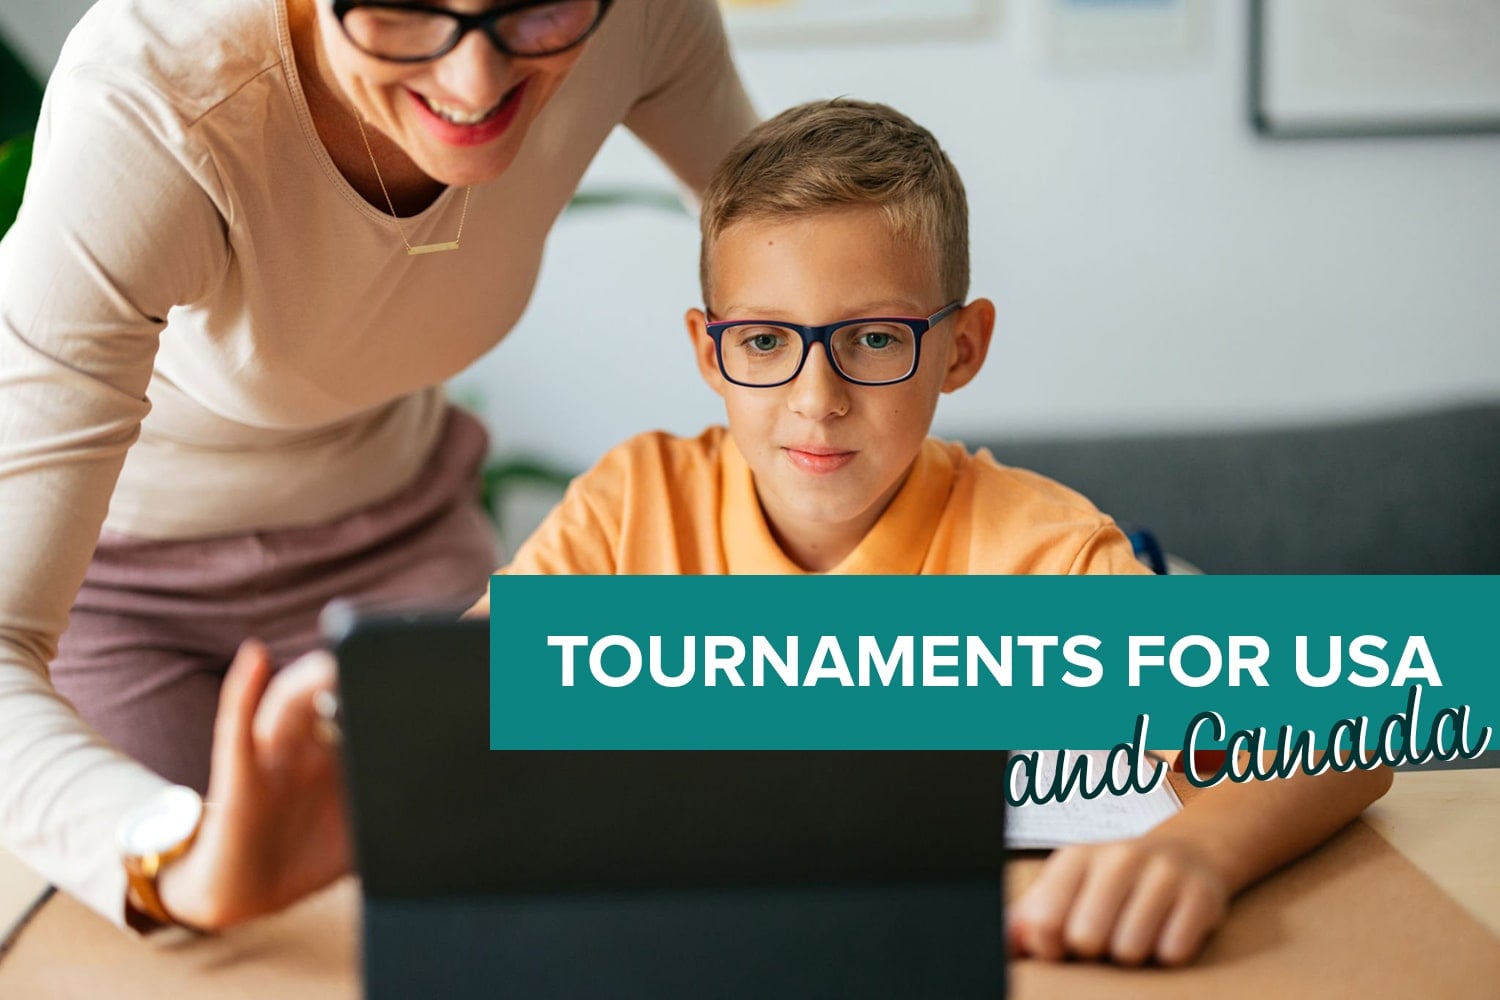 USA AND CANADA TOURNAMENTS ON LICHESS